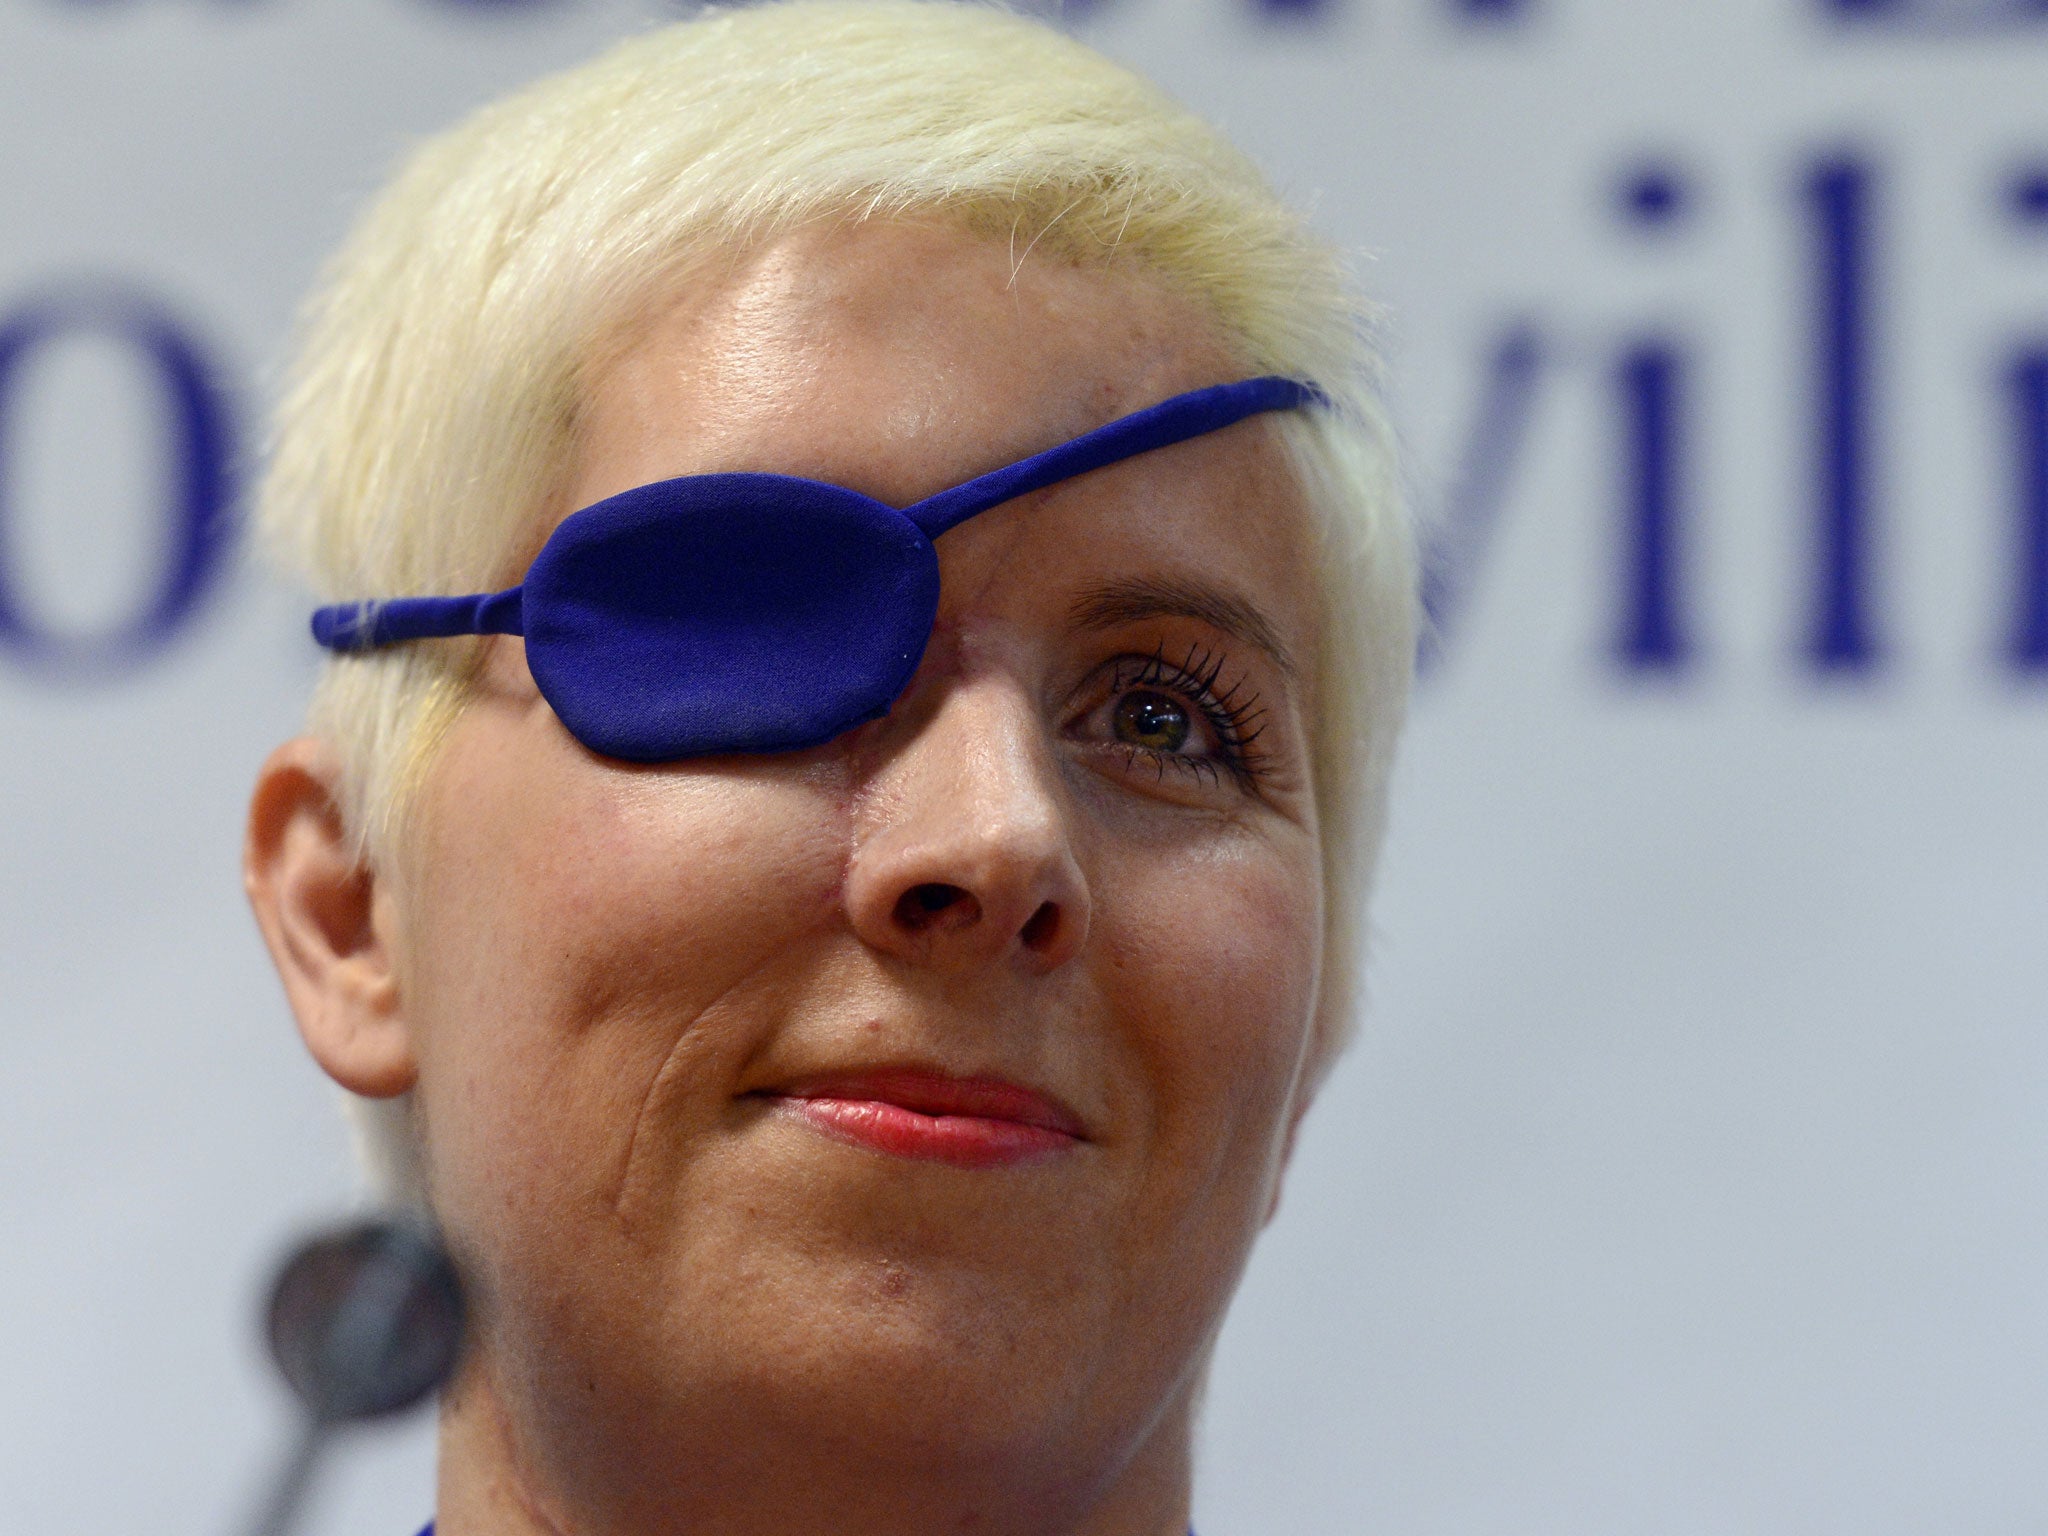 Maria de Villota has died aged 33 just a year after being involved in a horrific crash where she lost her right eye